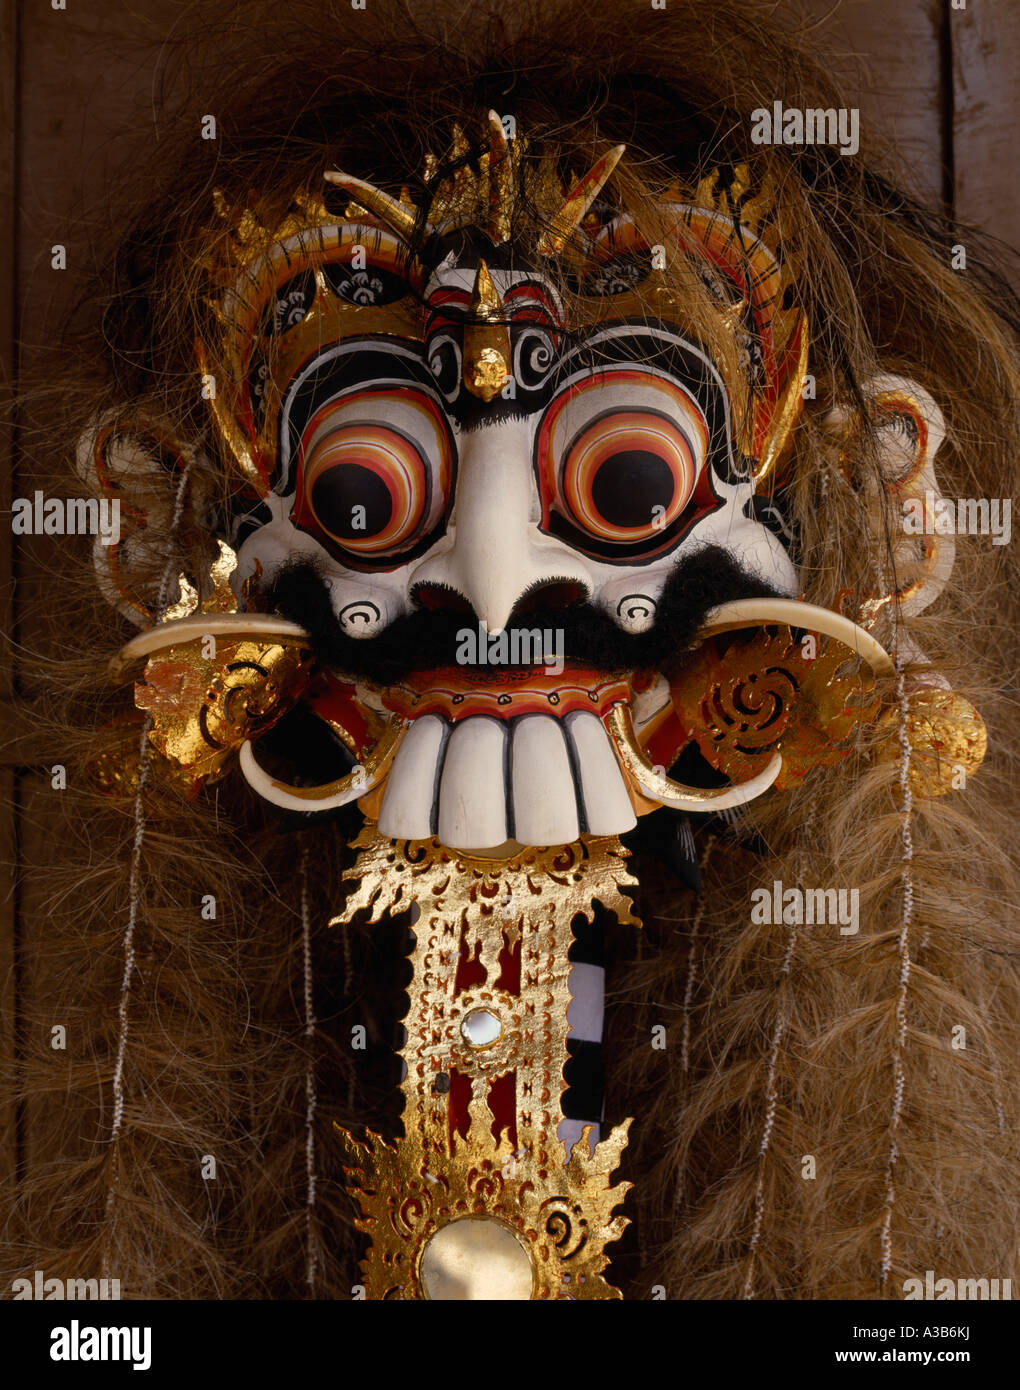 INDONESIA Southeast Asia Bali Traditional decorated ornate carved wooden dance mask with protruding eyes teeth and hair. Stock Photo